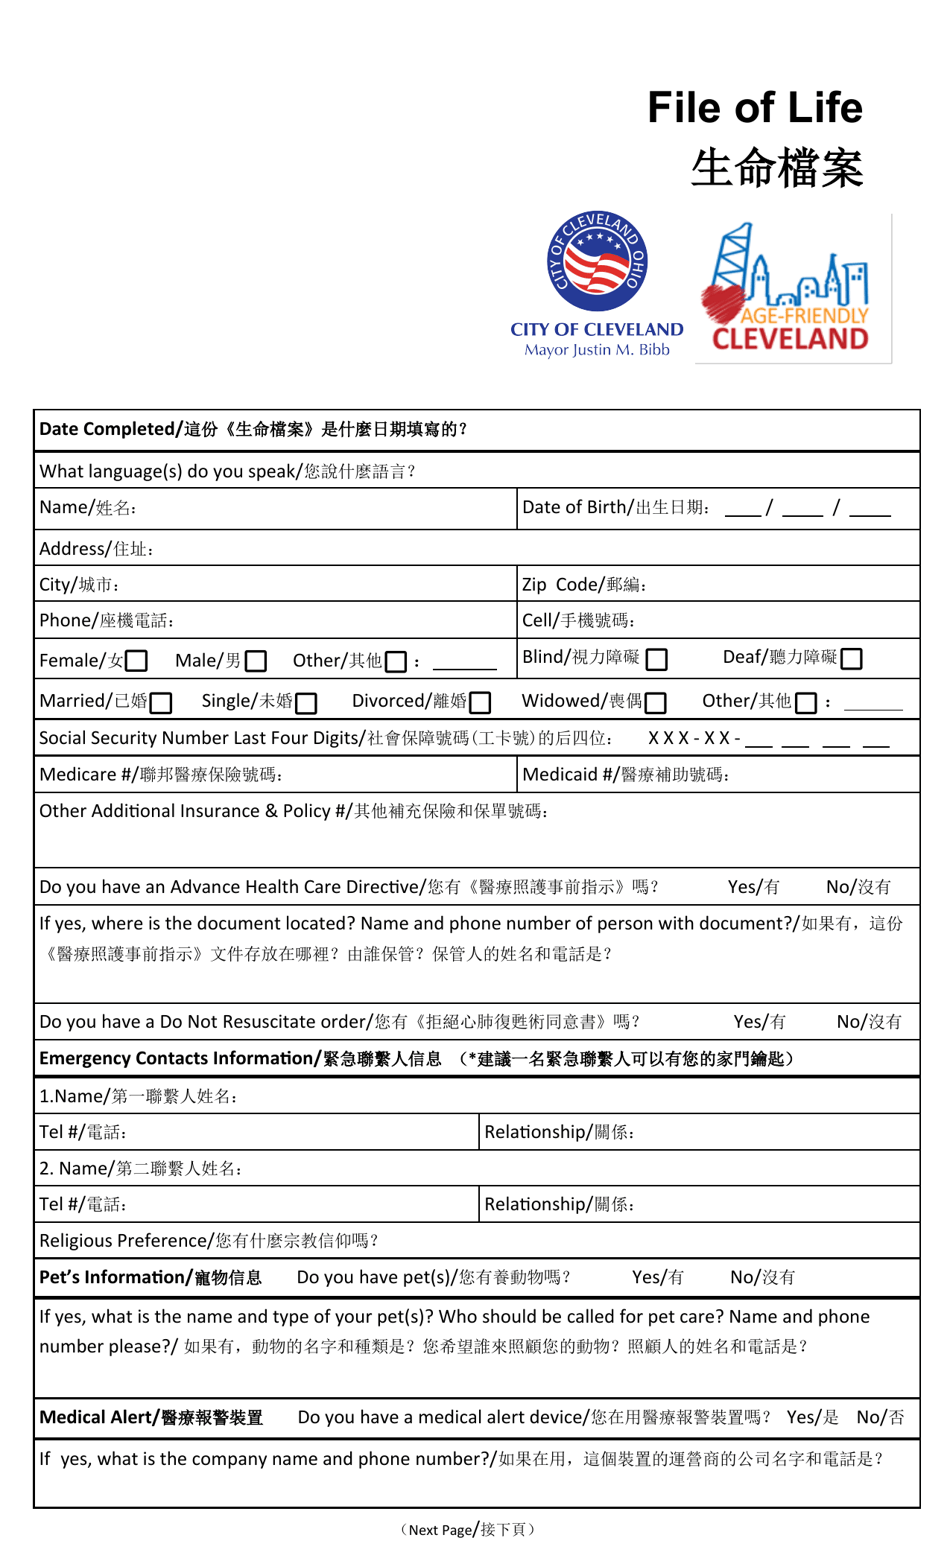 File of Life - City of Cleveland, Ohio (English / Chinese), Page 1